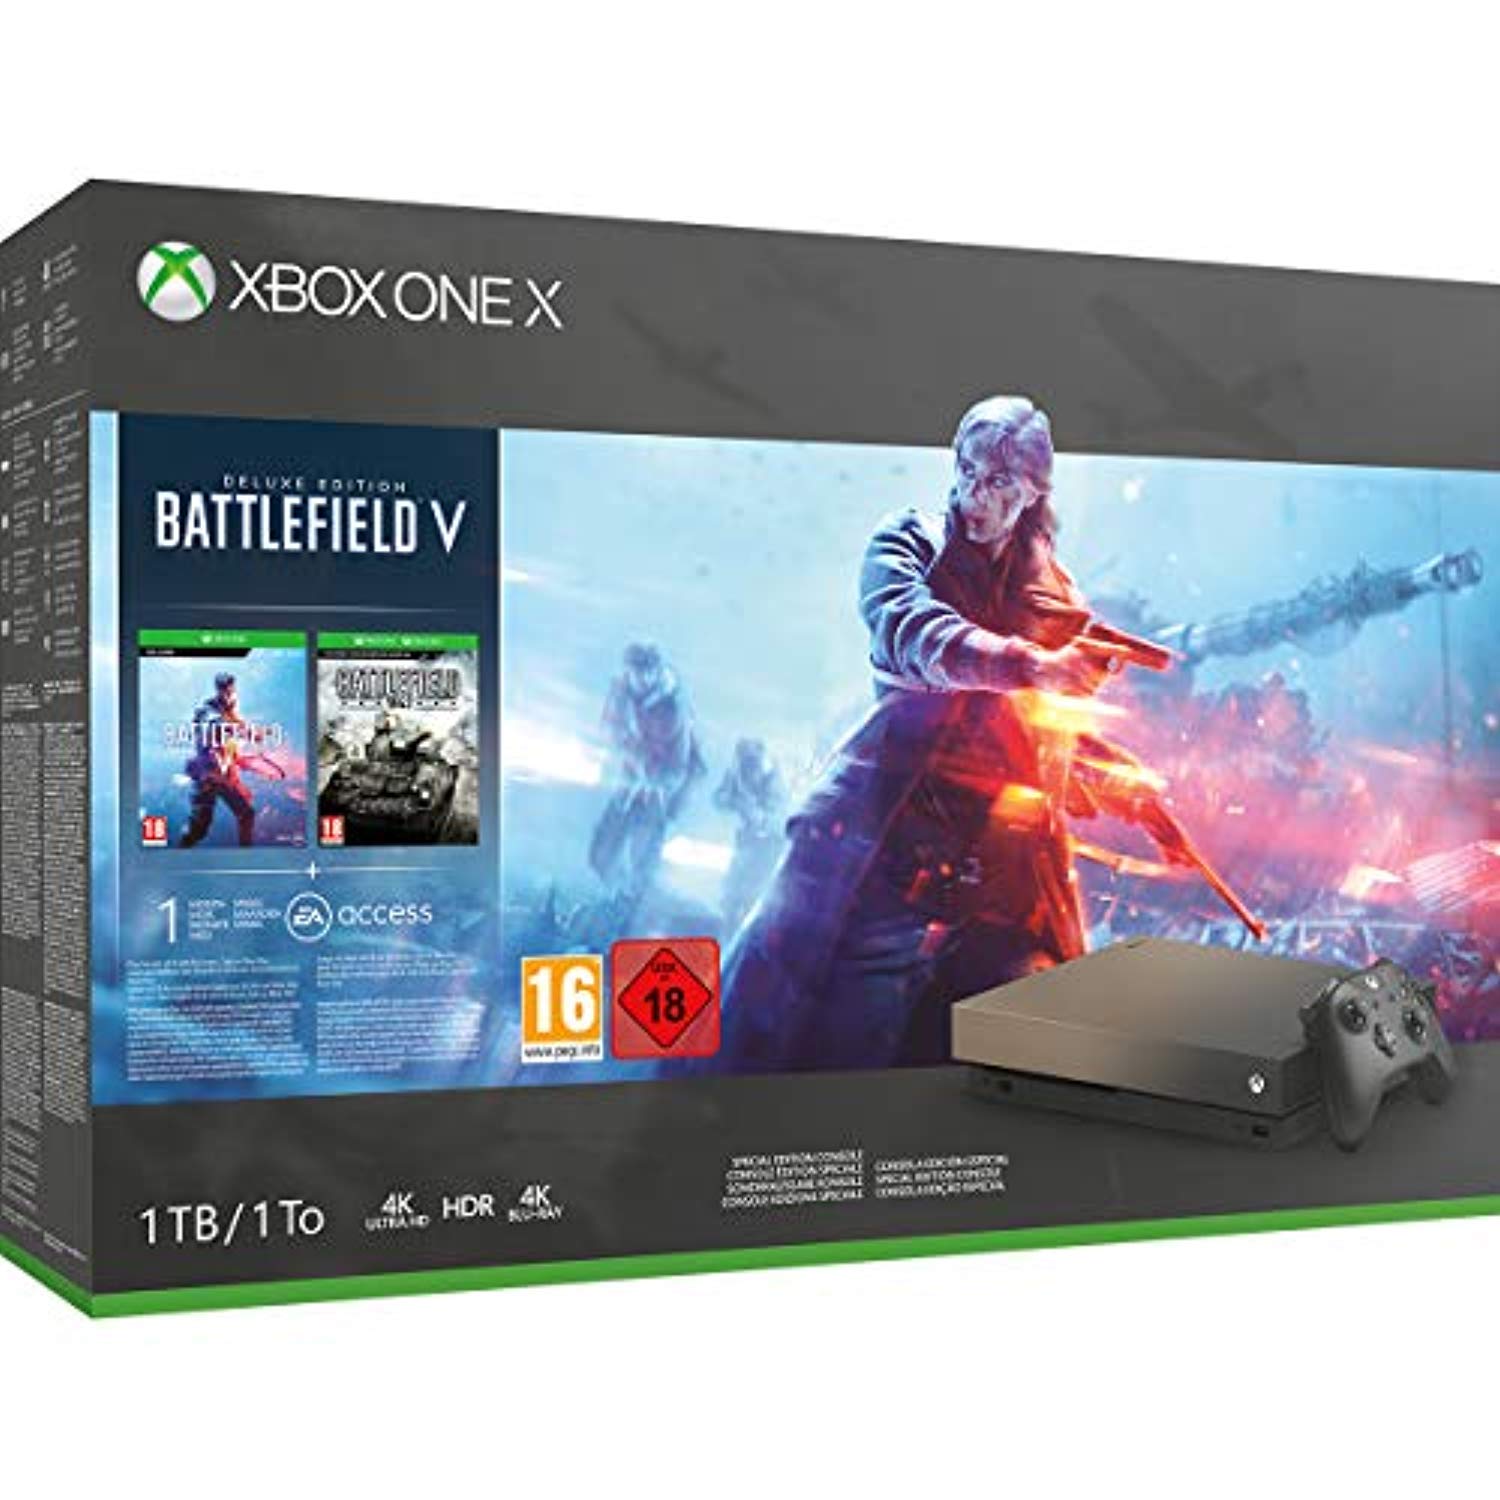 Xbox One X 1TB Gold Rush Special Edition console Battlefield V Bundle - Offer Games